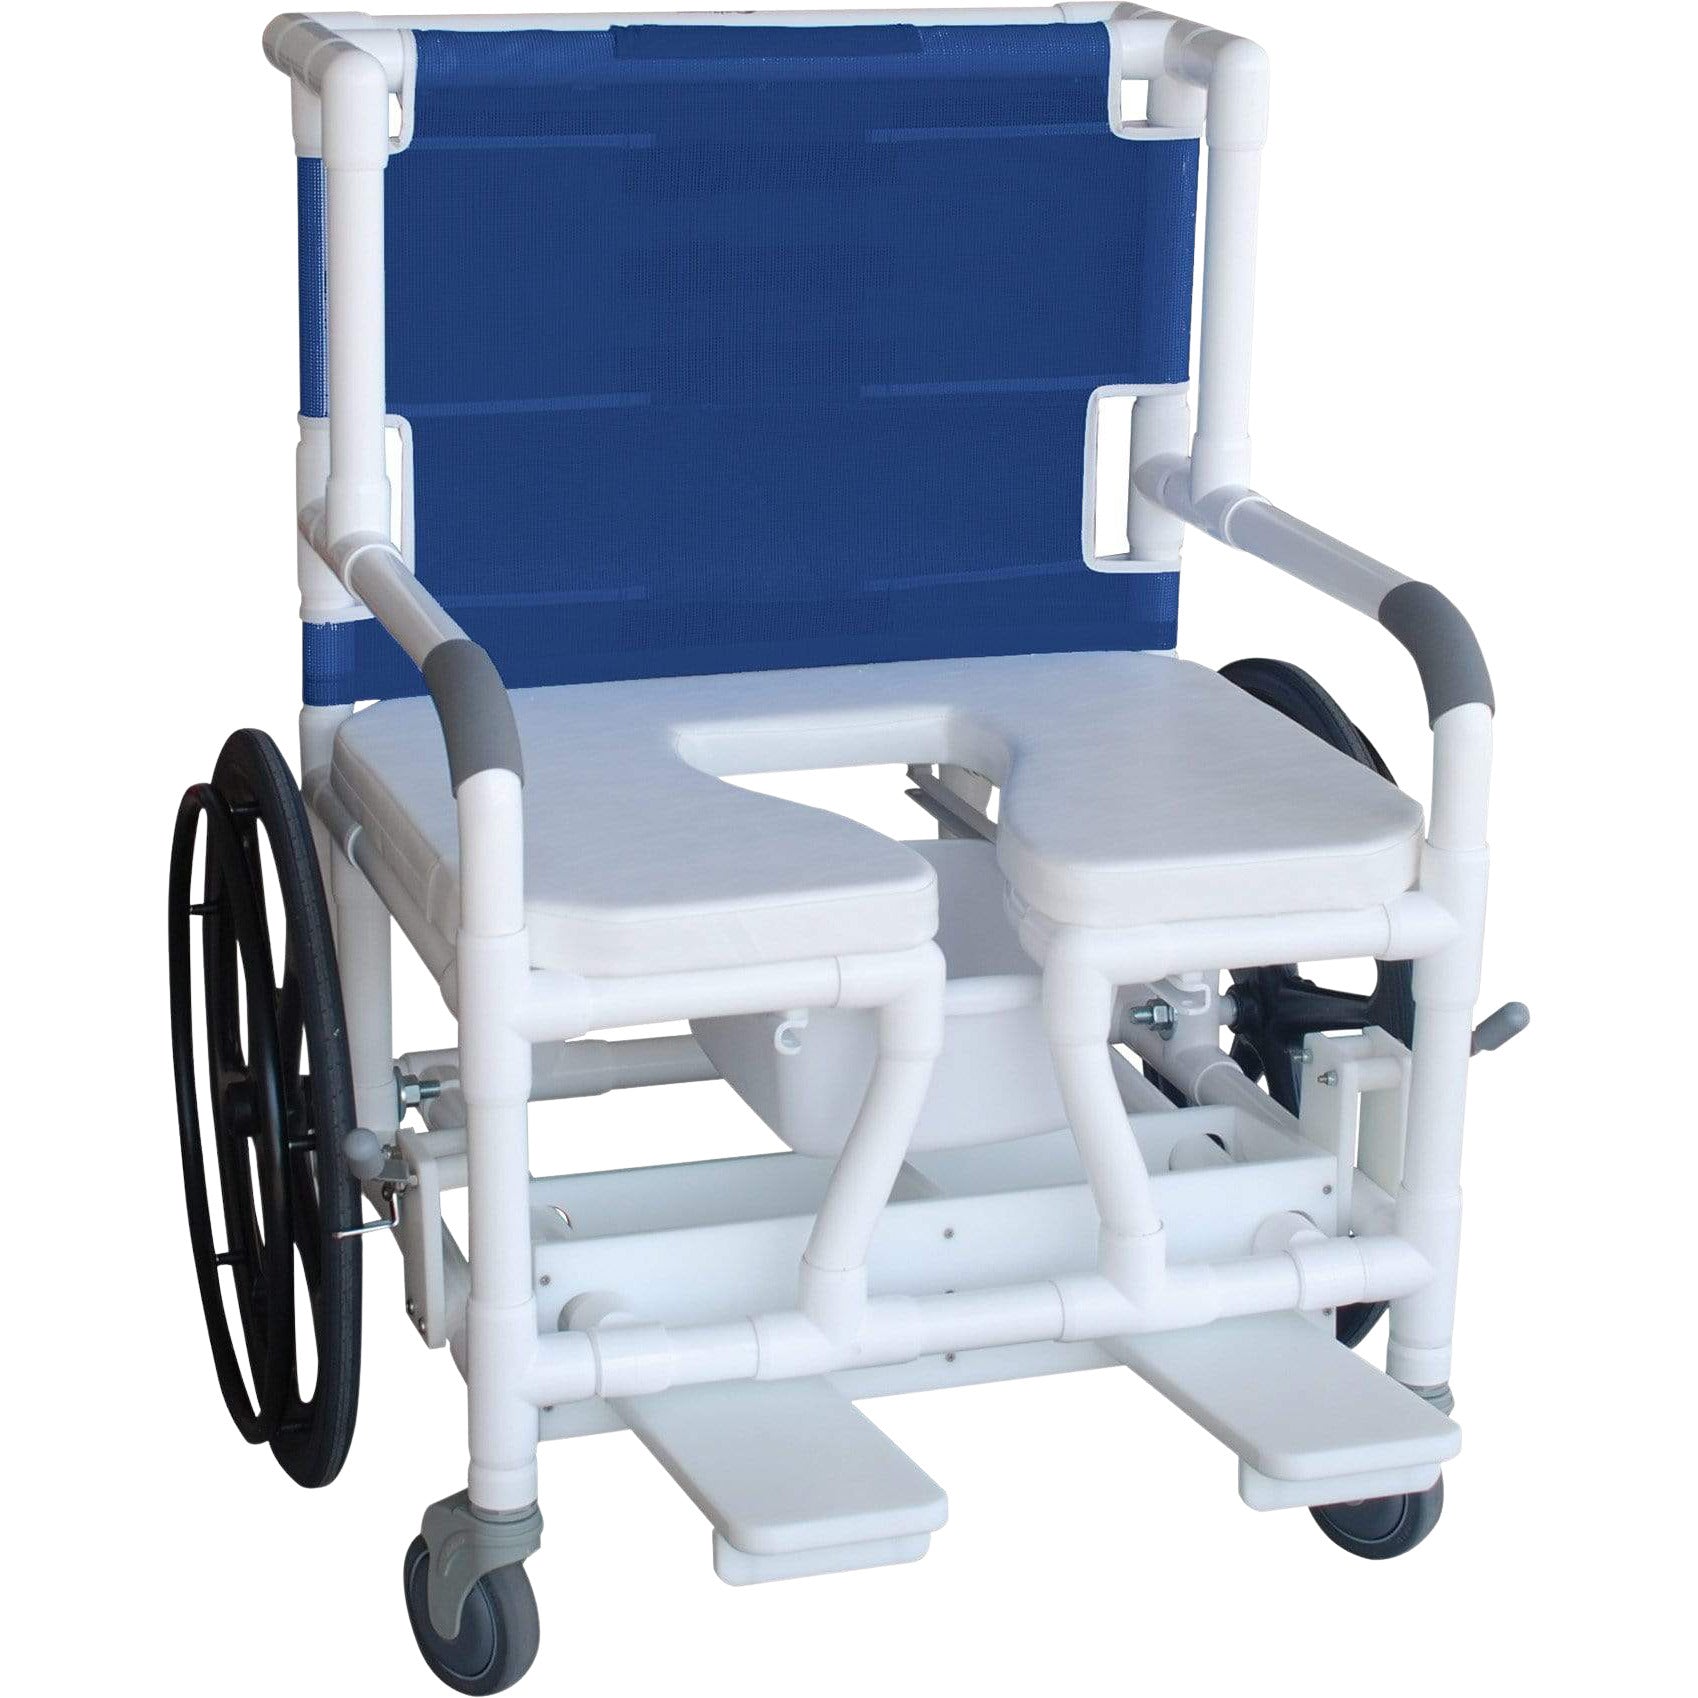 ConvaQuip Shower Chairs - PVC Bariatric Shower Commode Transfer Chair Model 140-26BAR-24W by ConvaQuip